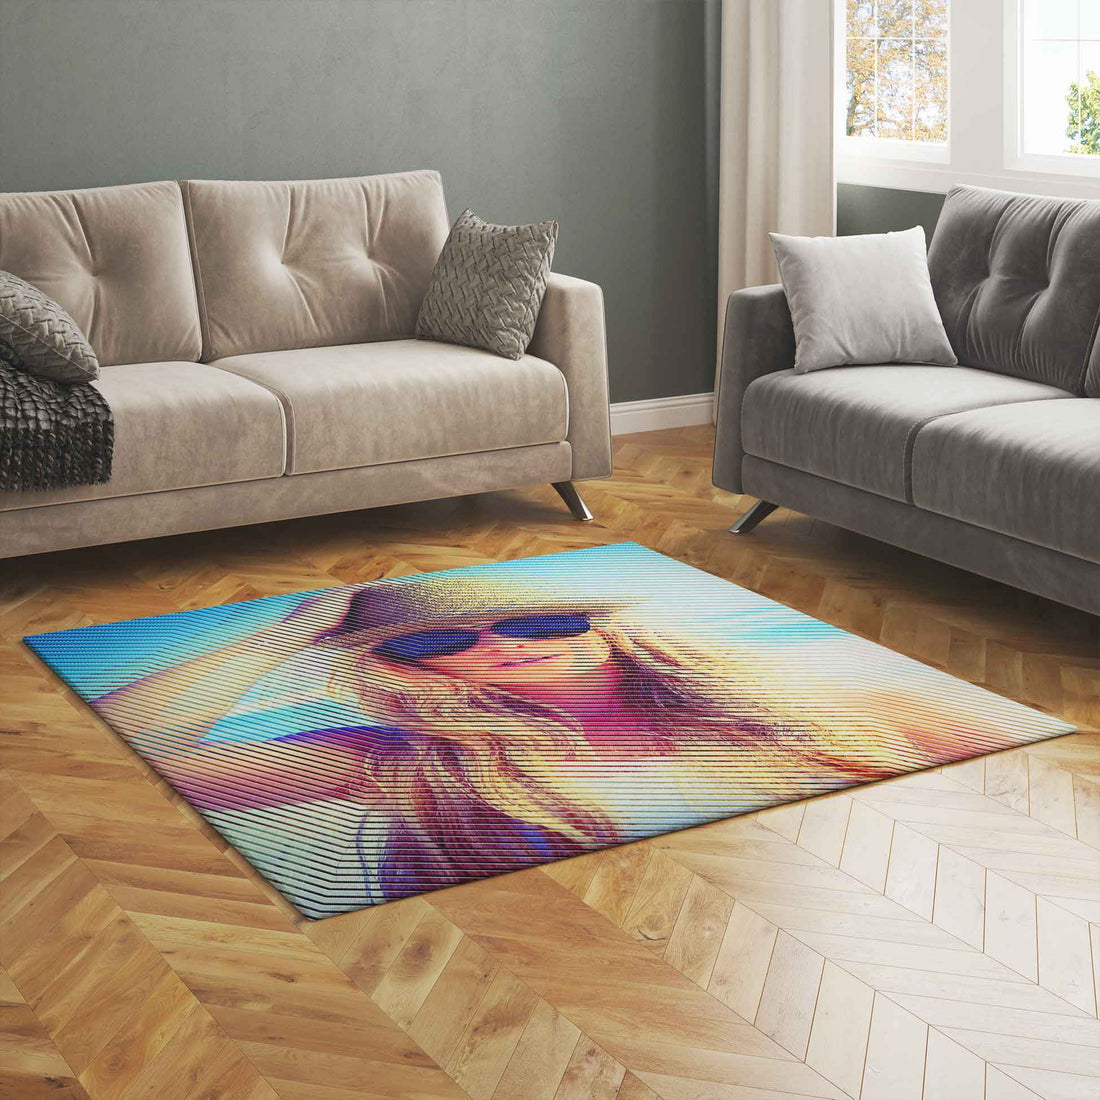 Create a cozy and personalized atmosphere with an abstract lines photo rug, uniquely designed to reflect your taste and preferences